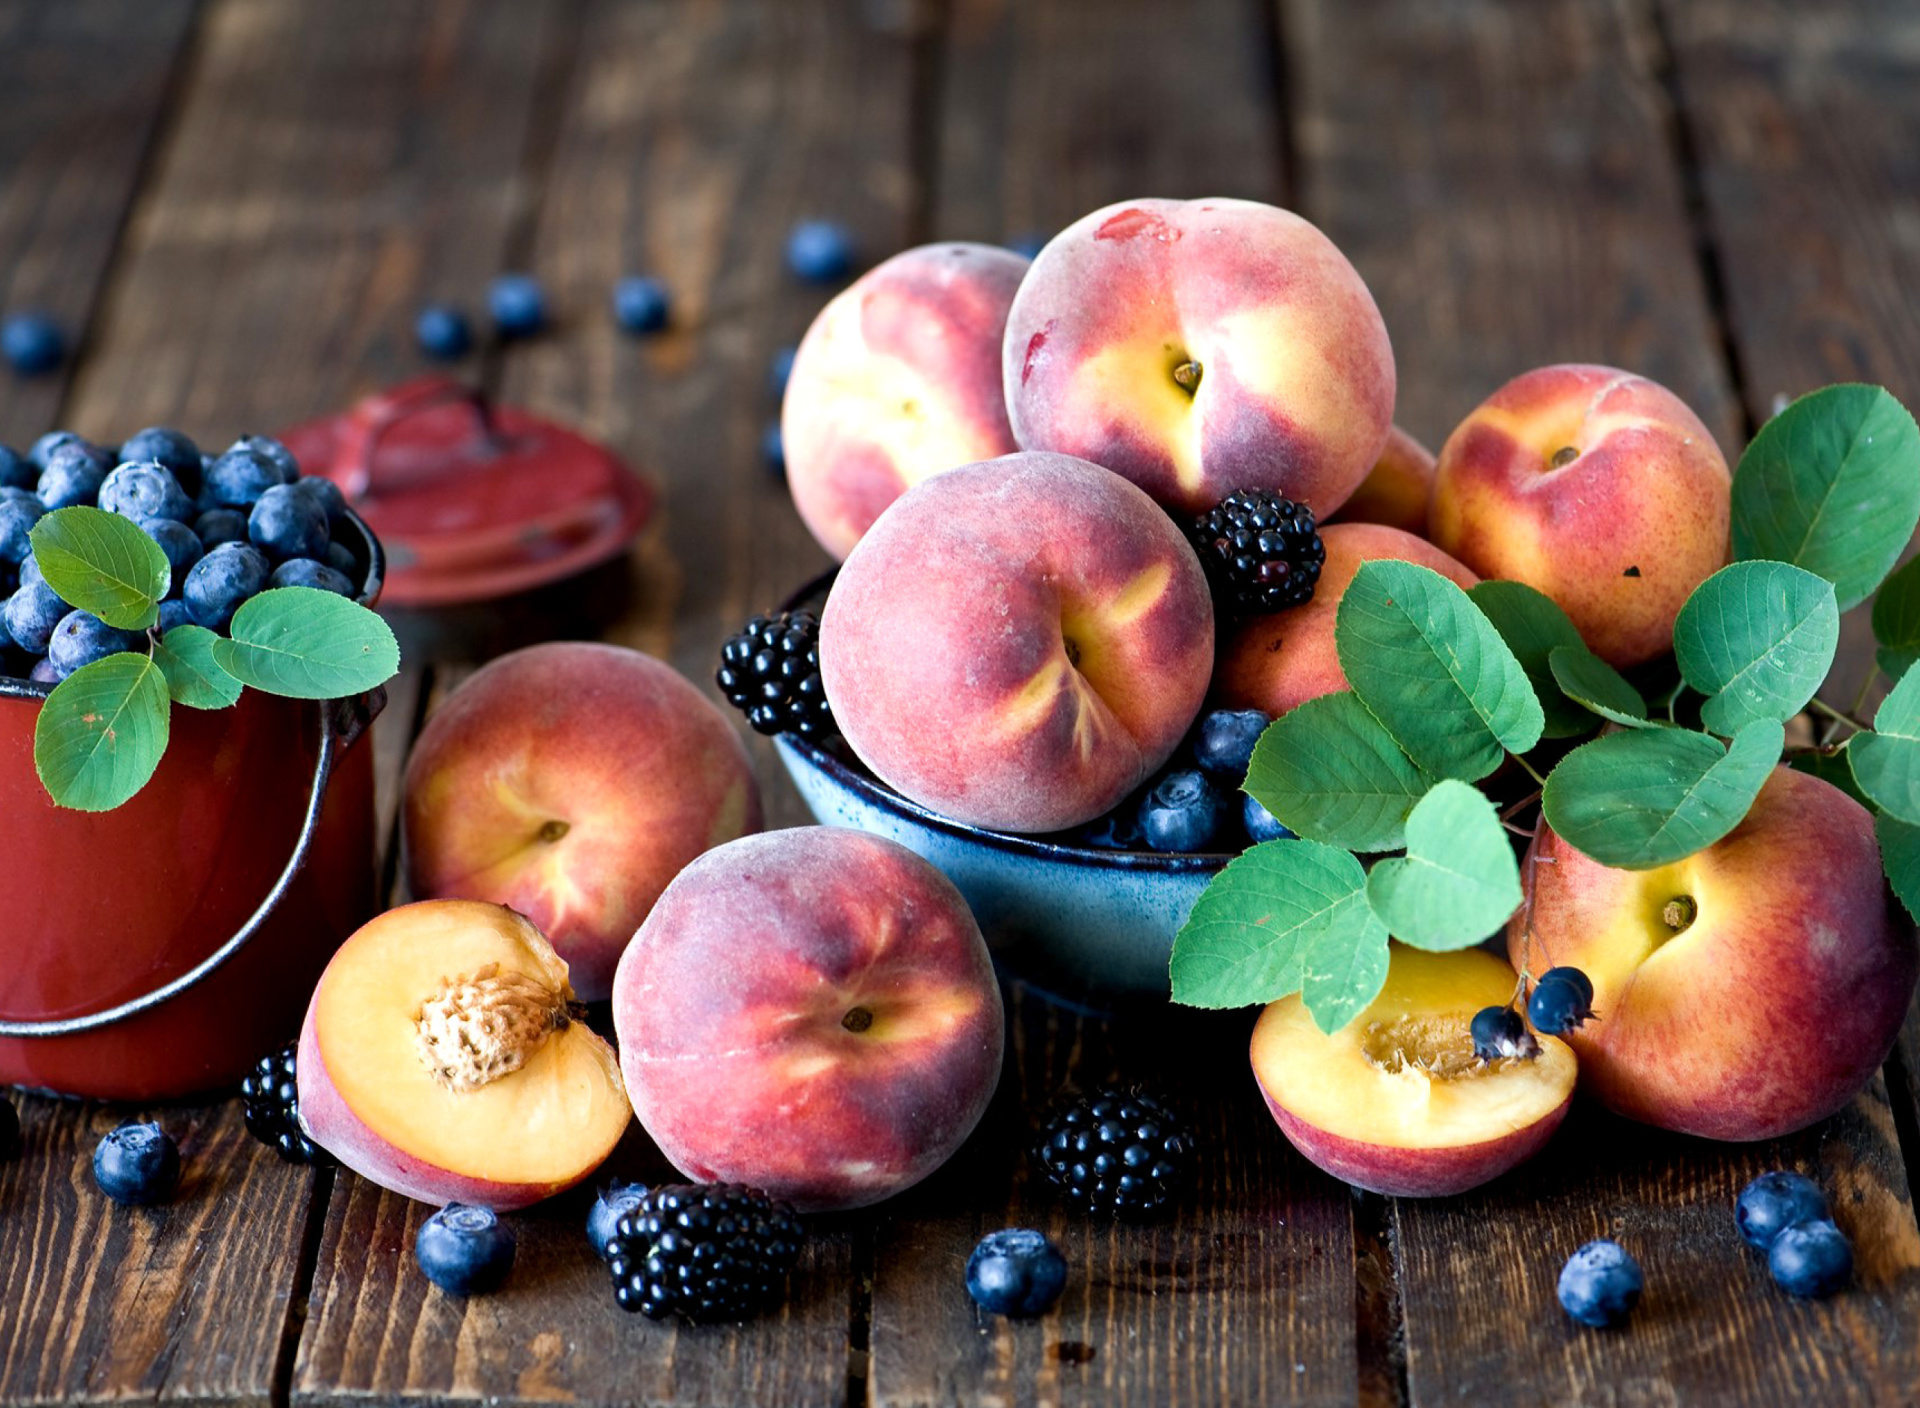 Blueberries and Peaches wallpaper 1920x1408